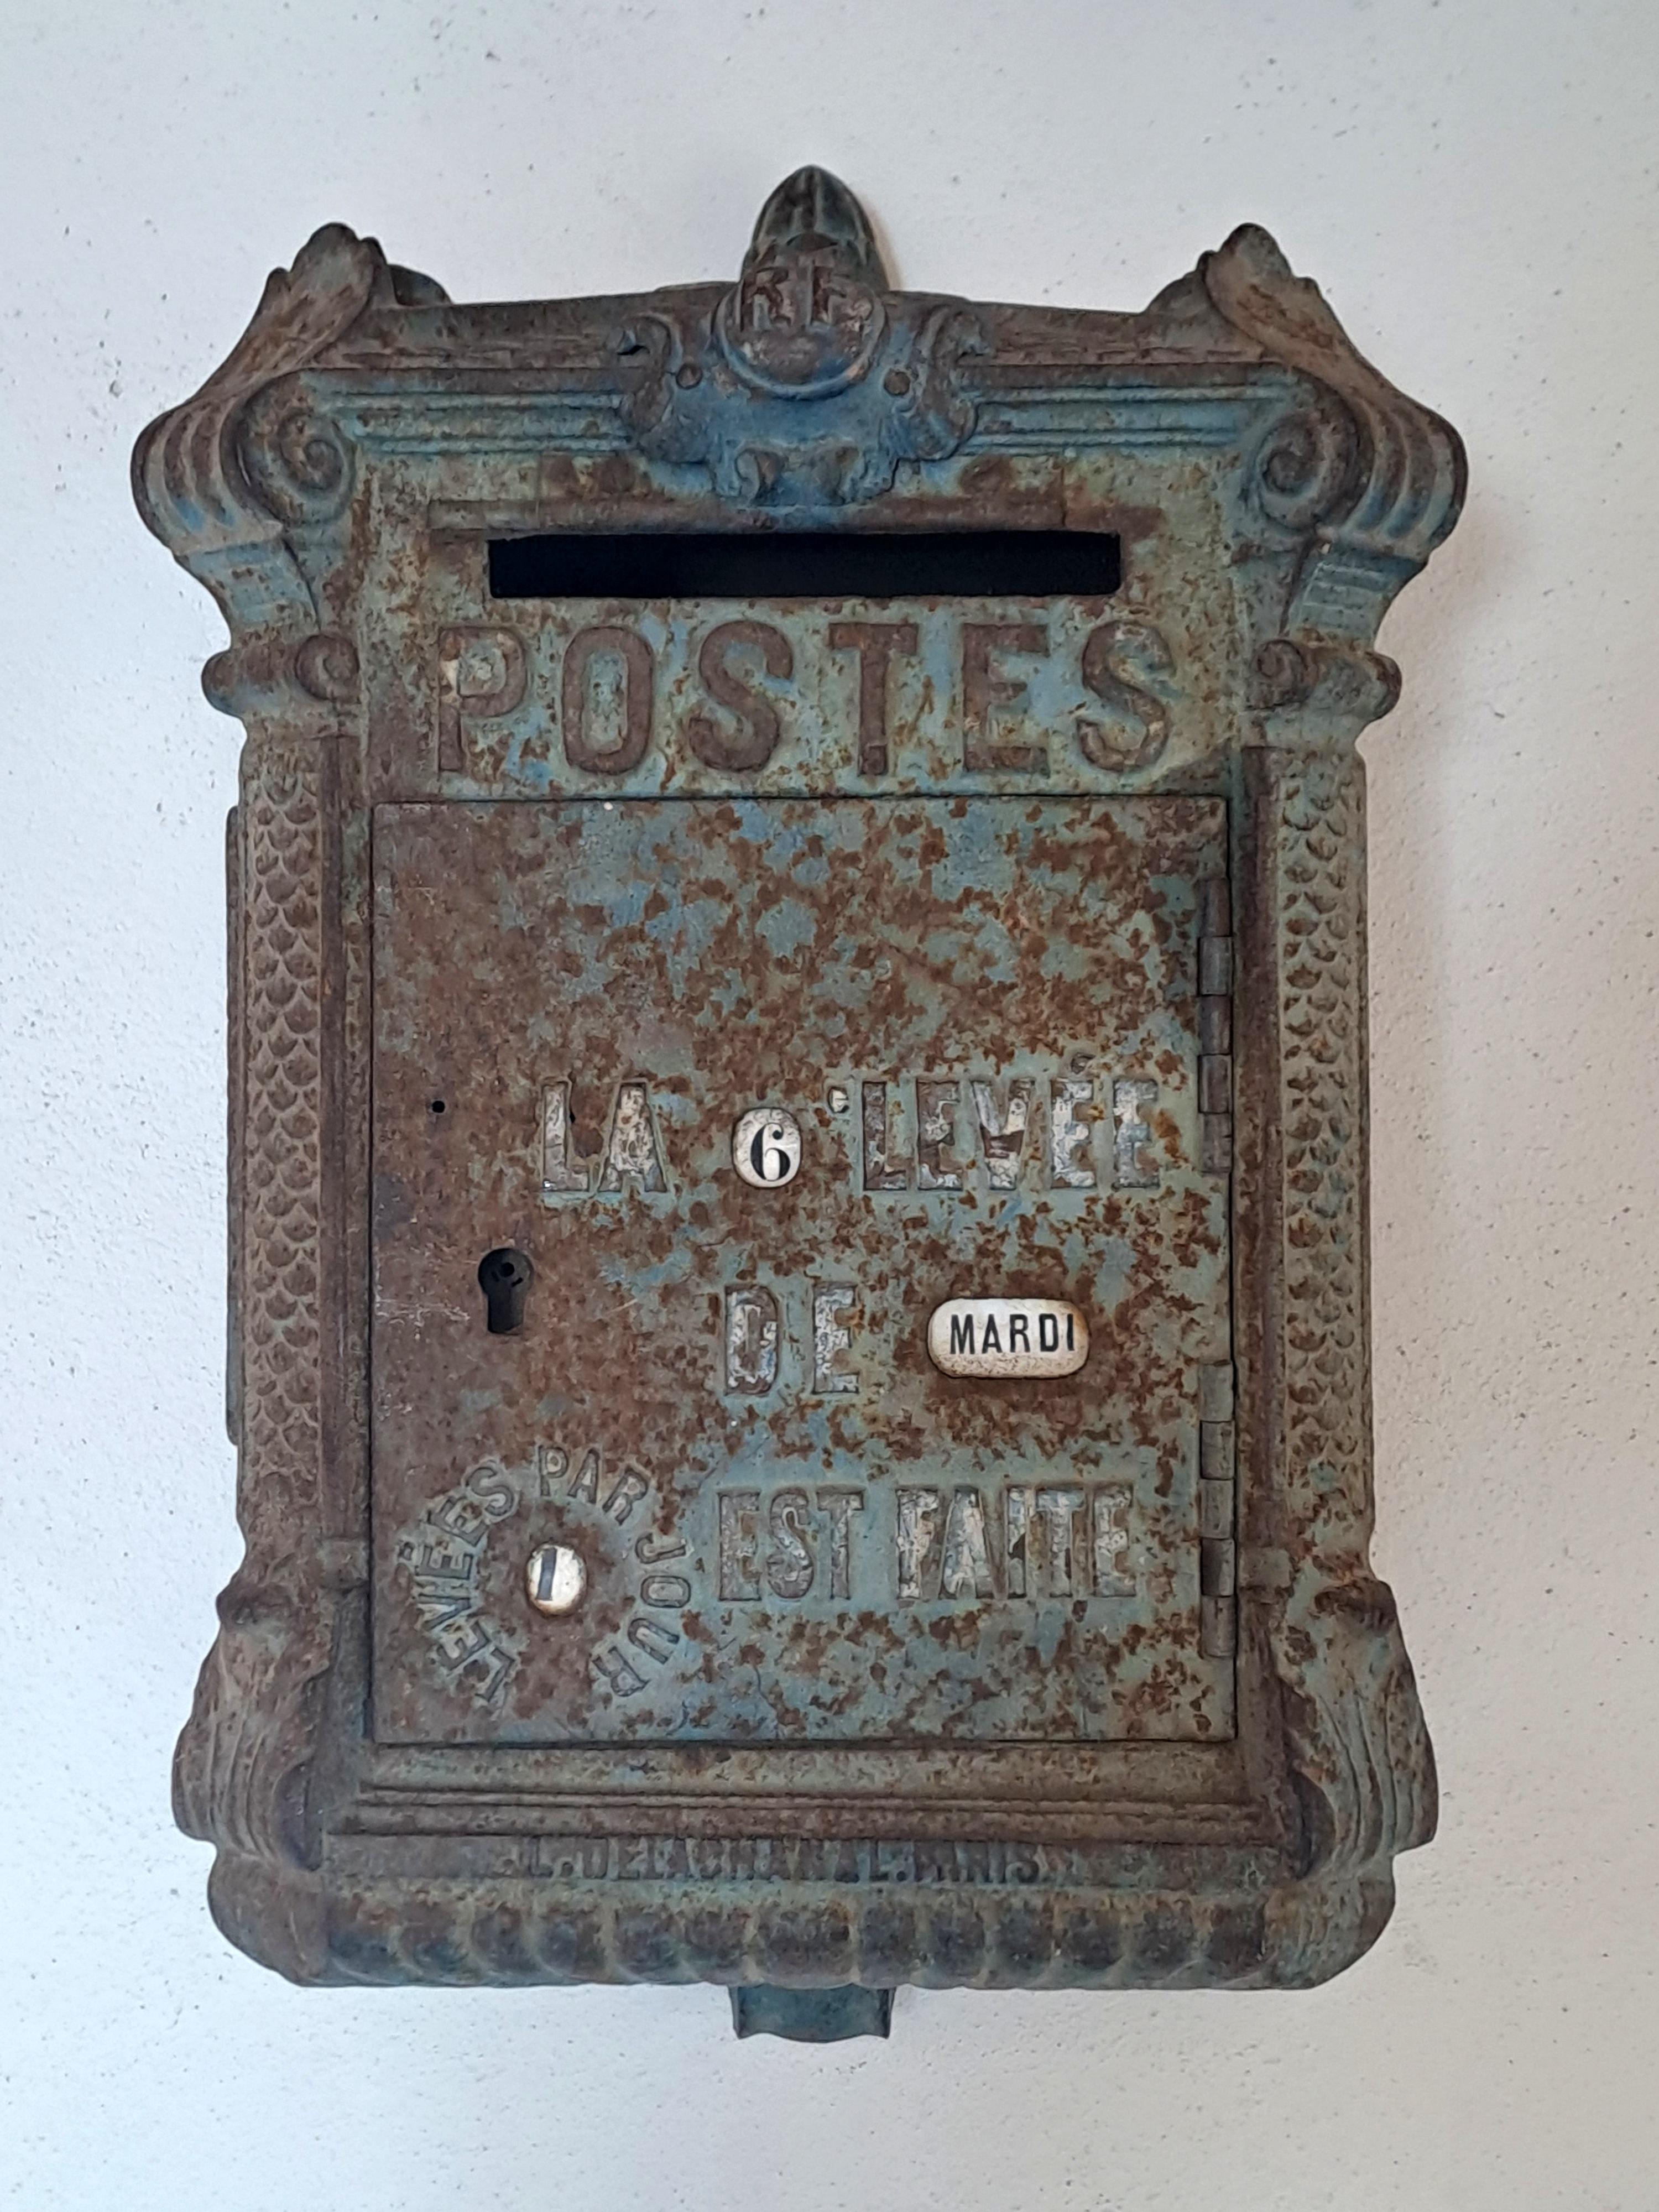 Public mailbox of the French Post Office Model in molded cast iron manufactured by Delachanal in Paris - Late 19th Century

Good general condition - presented in its original condition with superficial corrosion, missing key and flap